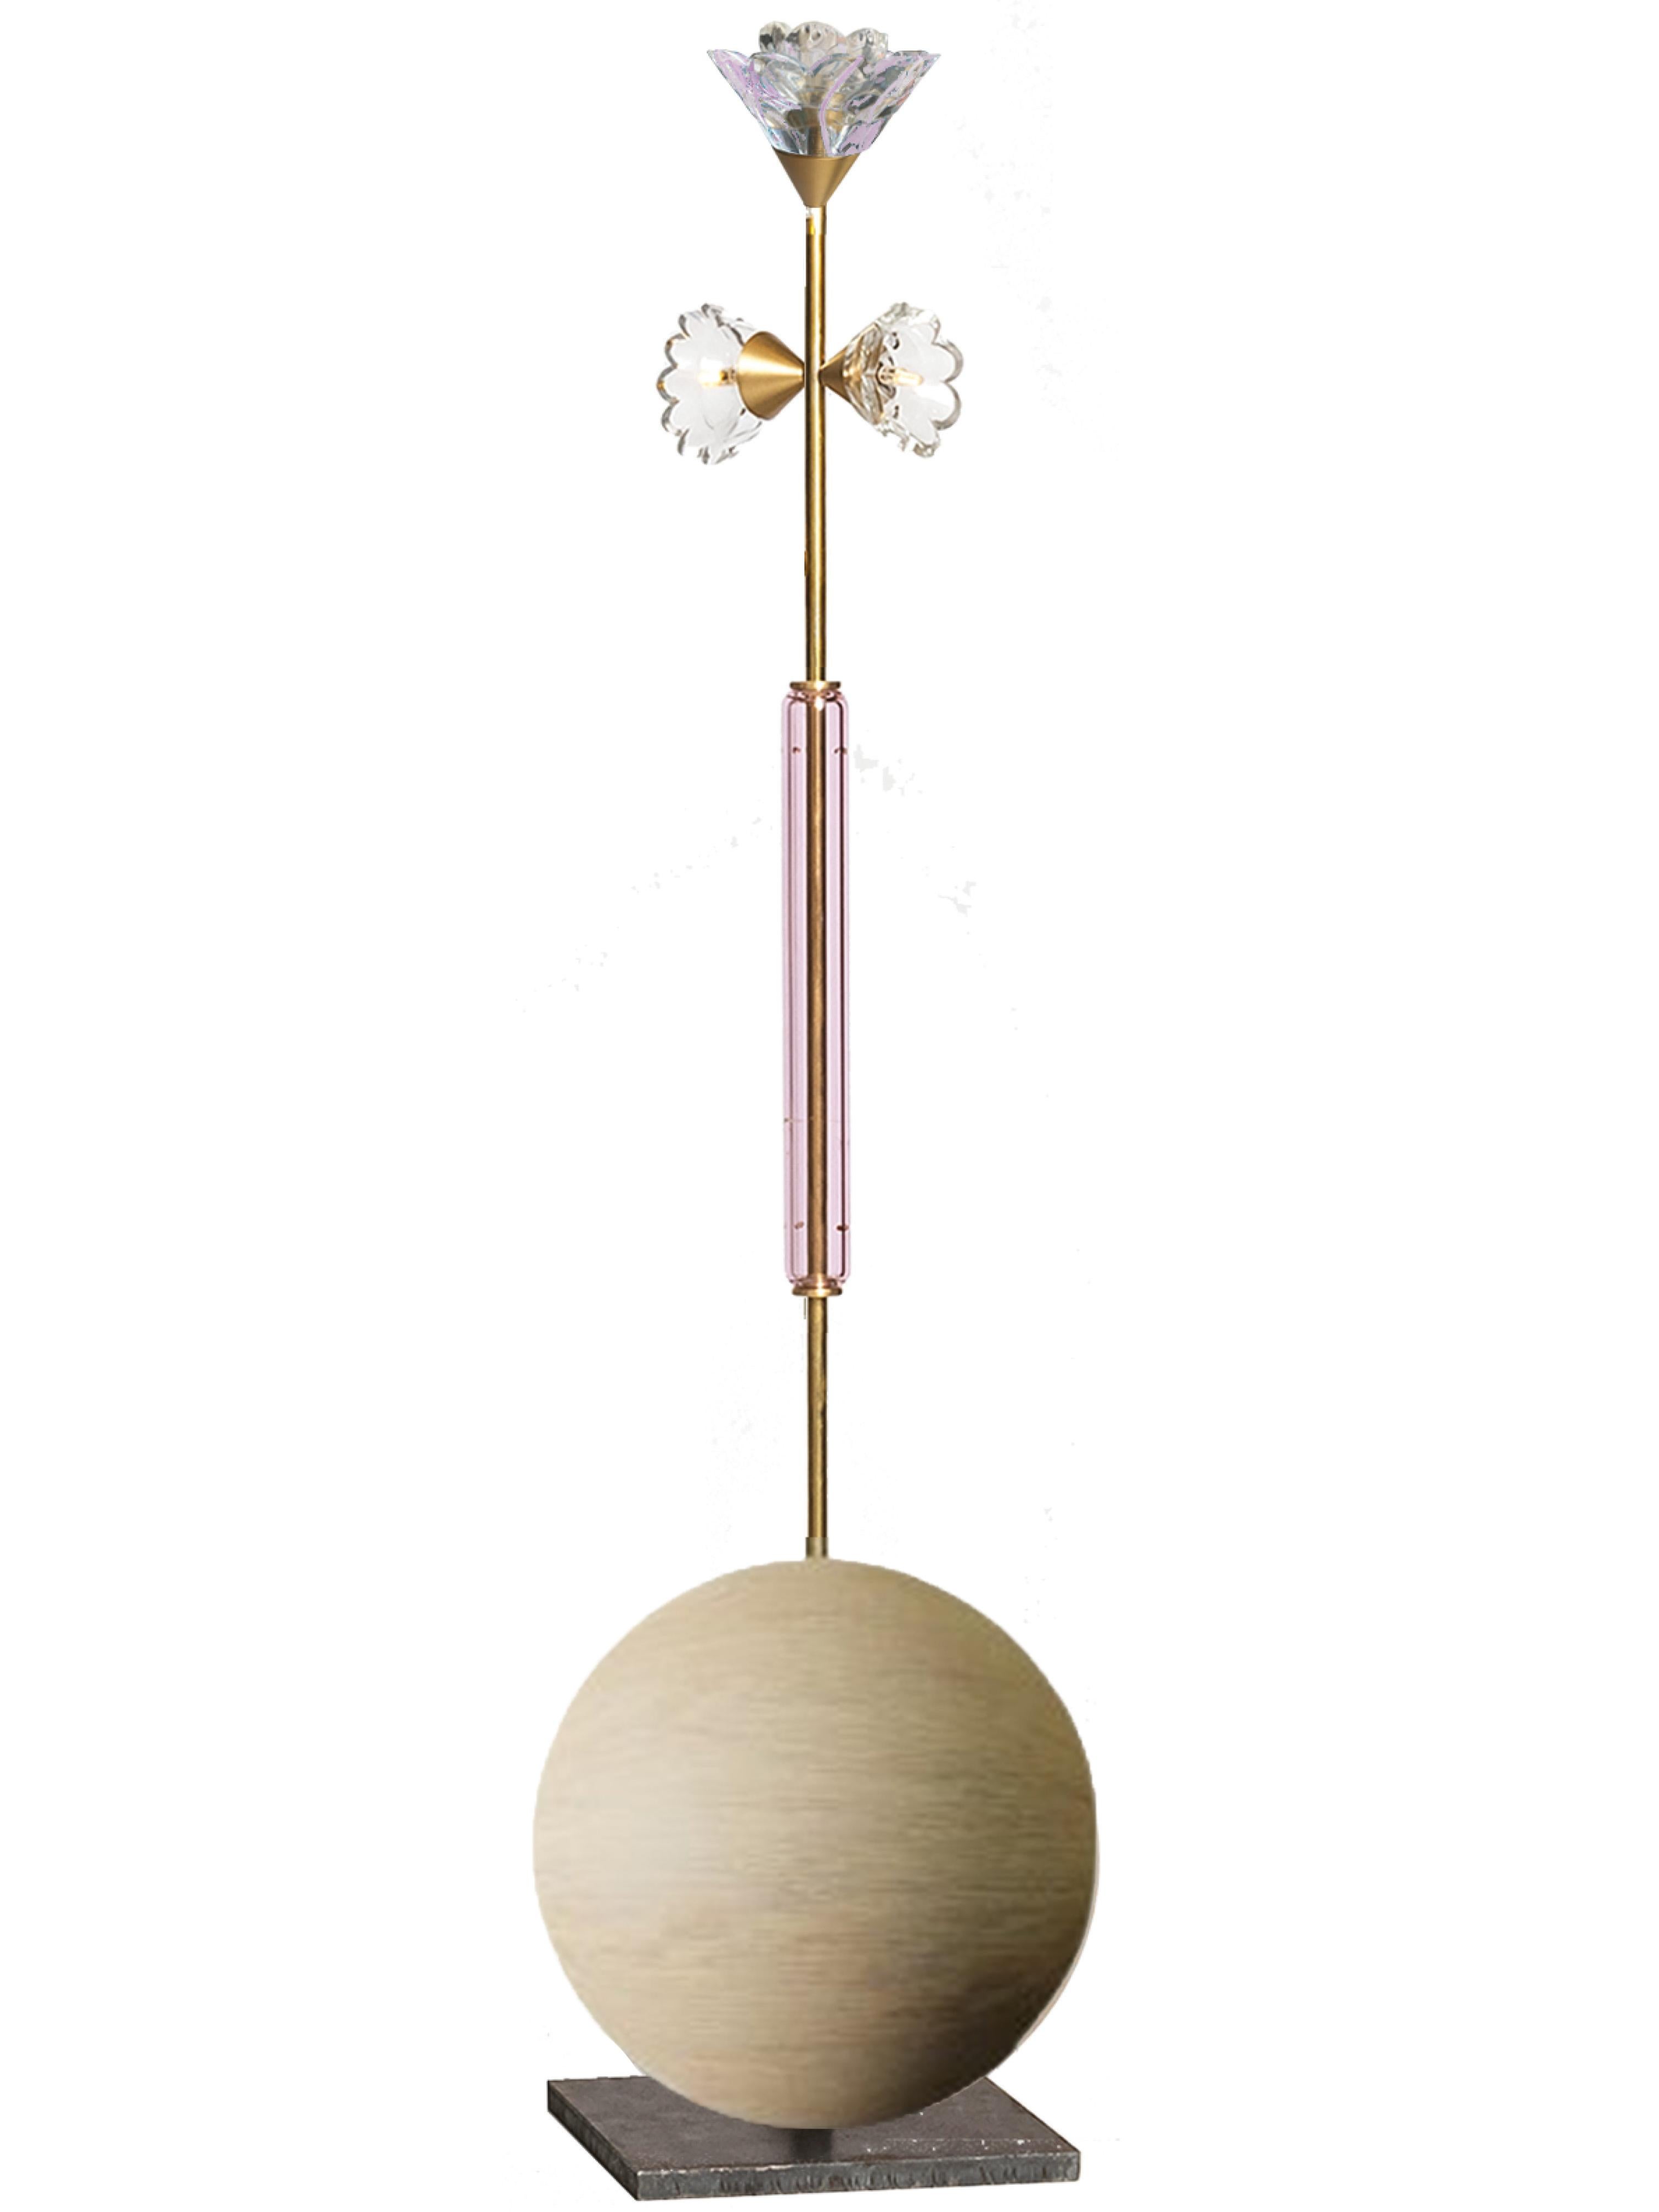 ball - floor lamp by Sema Topaloglu

This product is hand-crafted therefore each production is unique and might not be exactly the same as visual.

 lighting was part of the collection which was exhibited during Milan Design Week 2022, and had